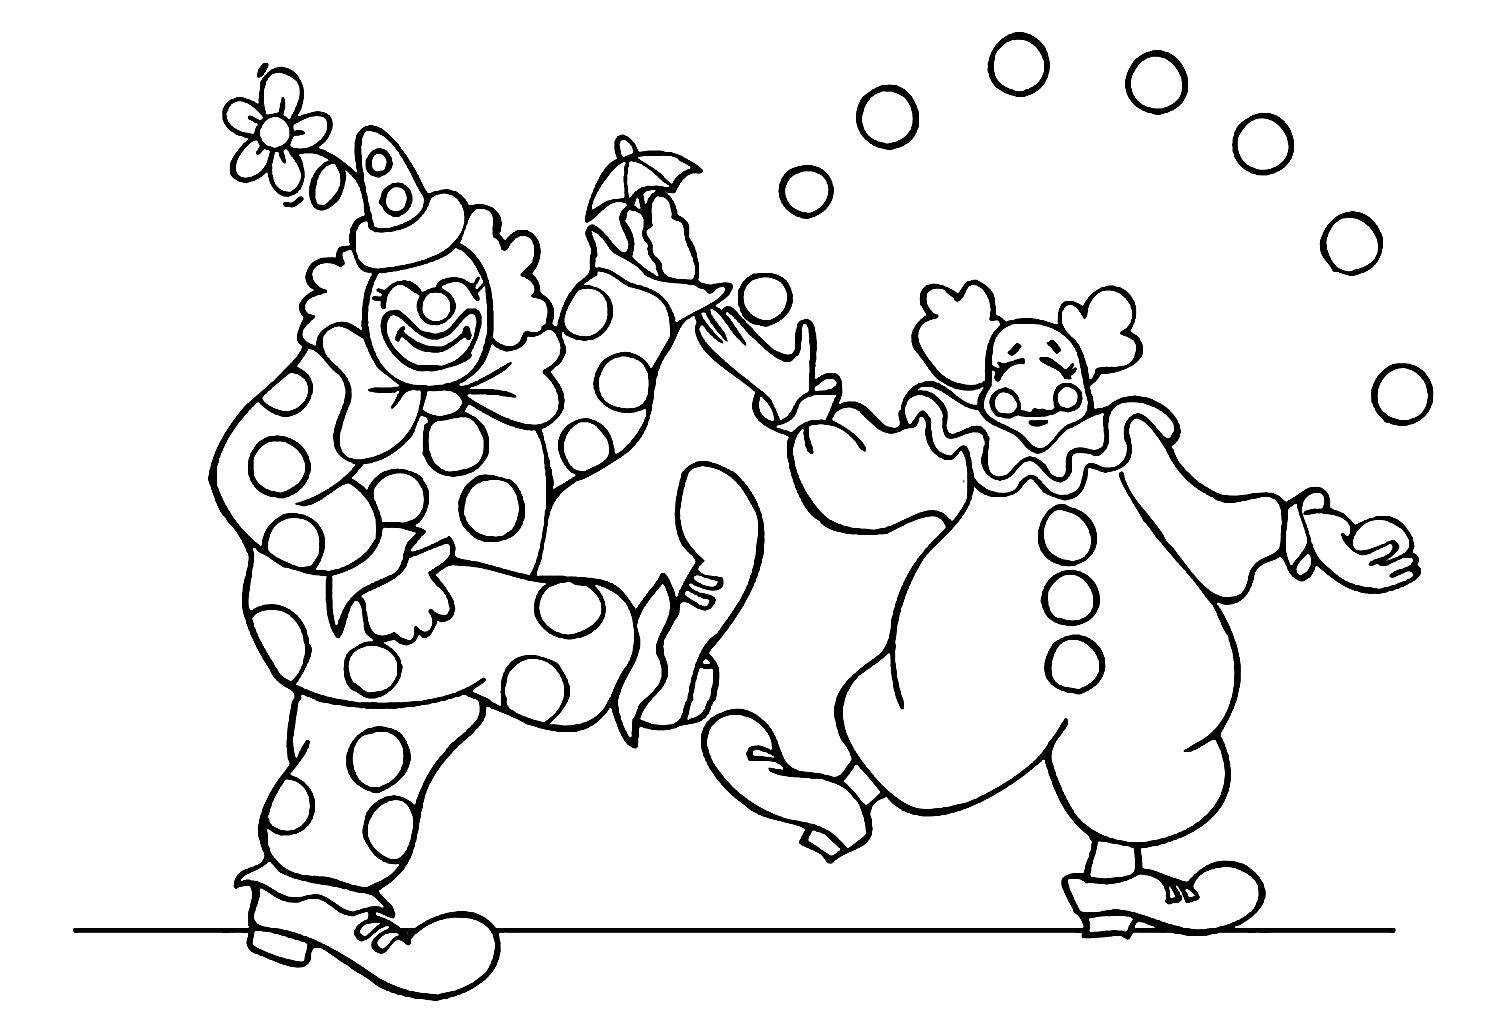 Incredible Circus coloring pages for kids